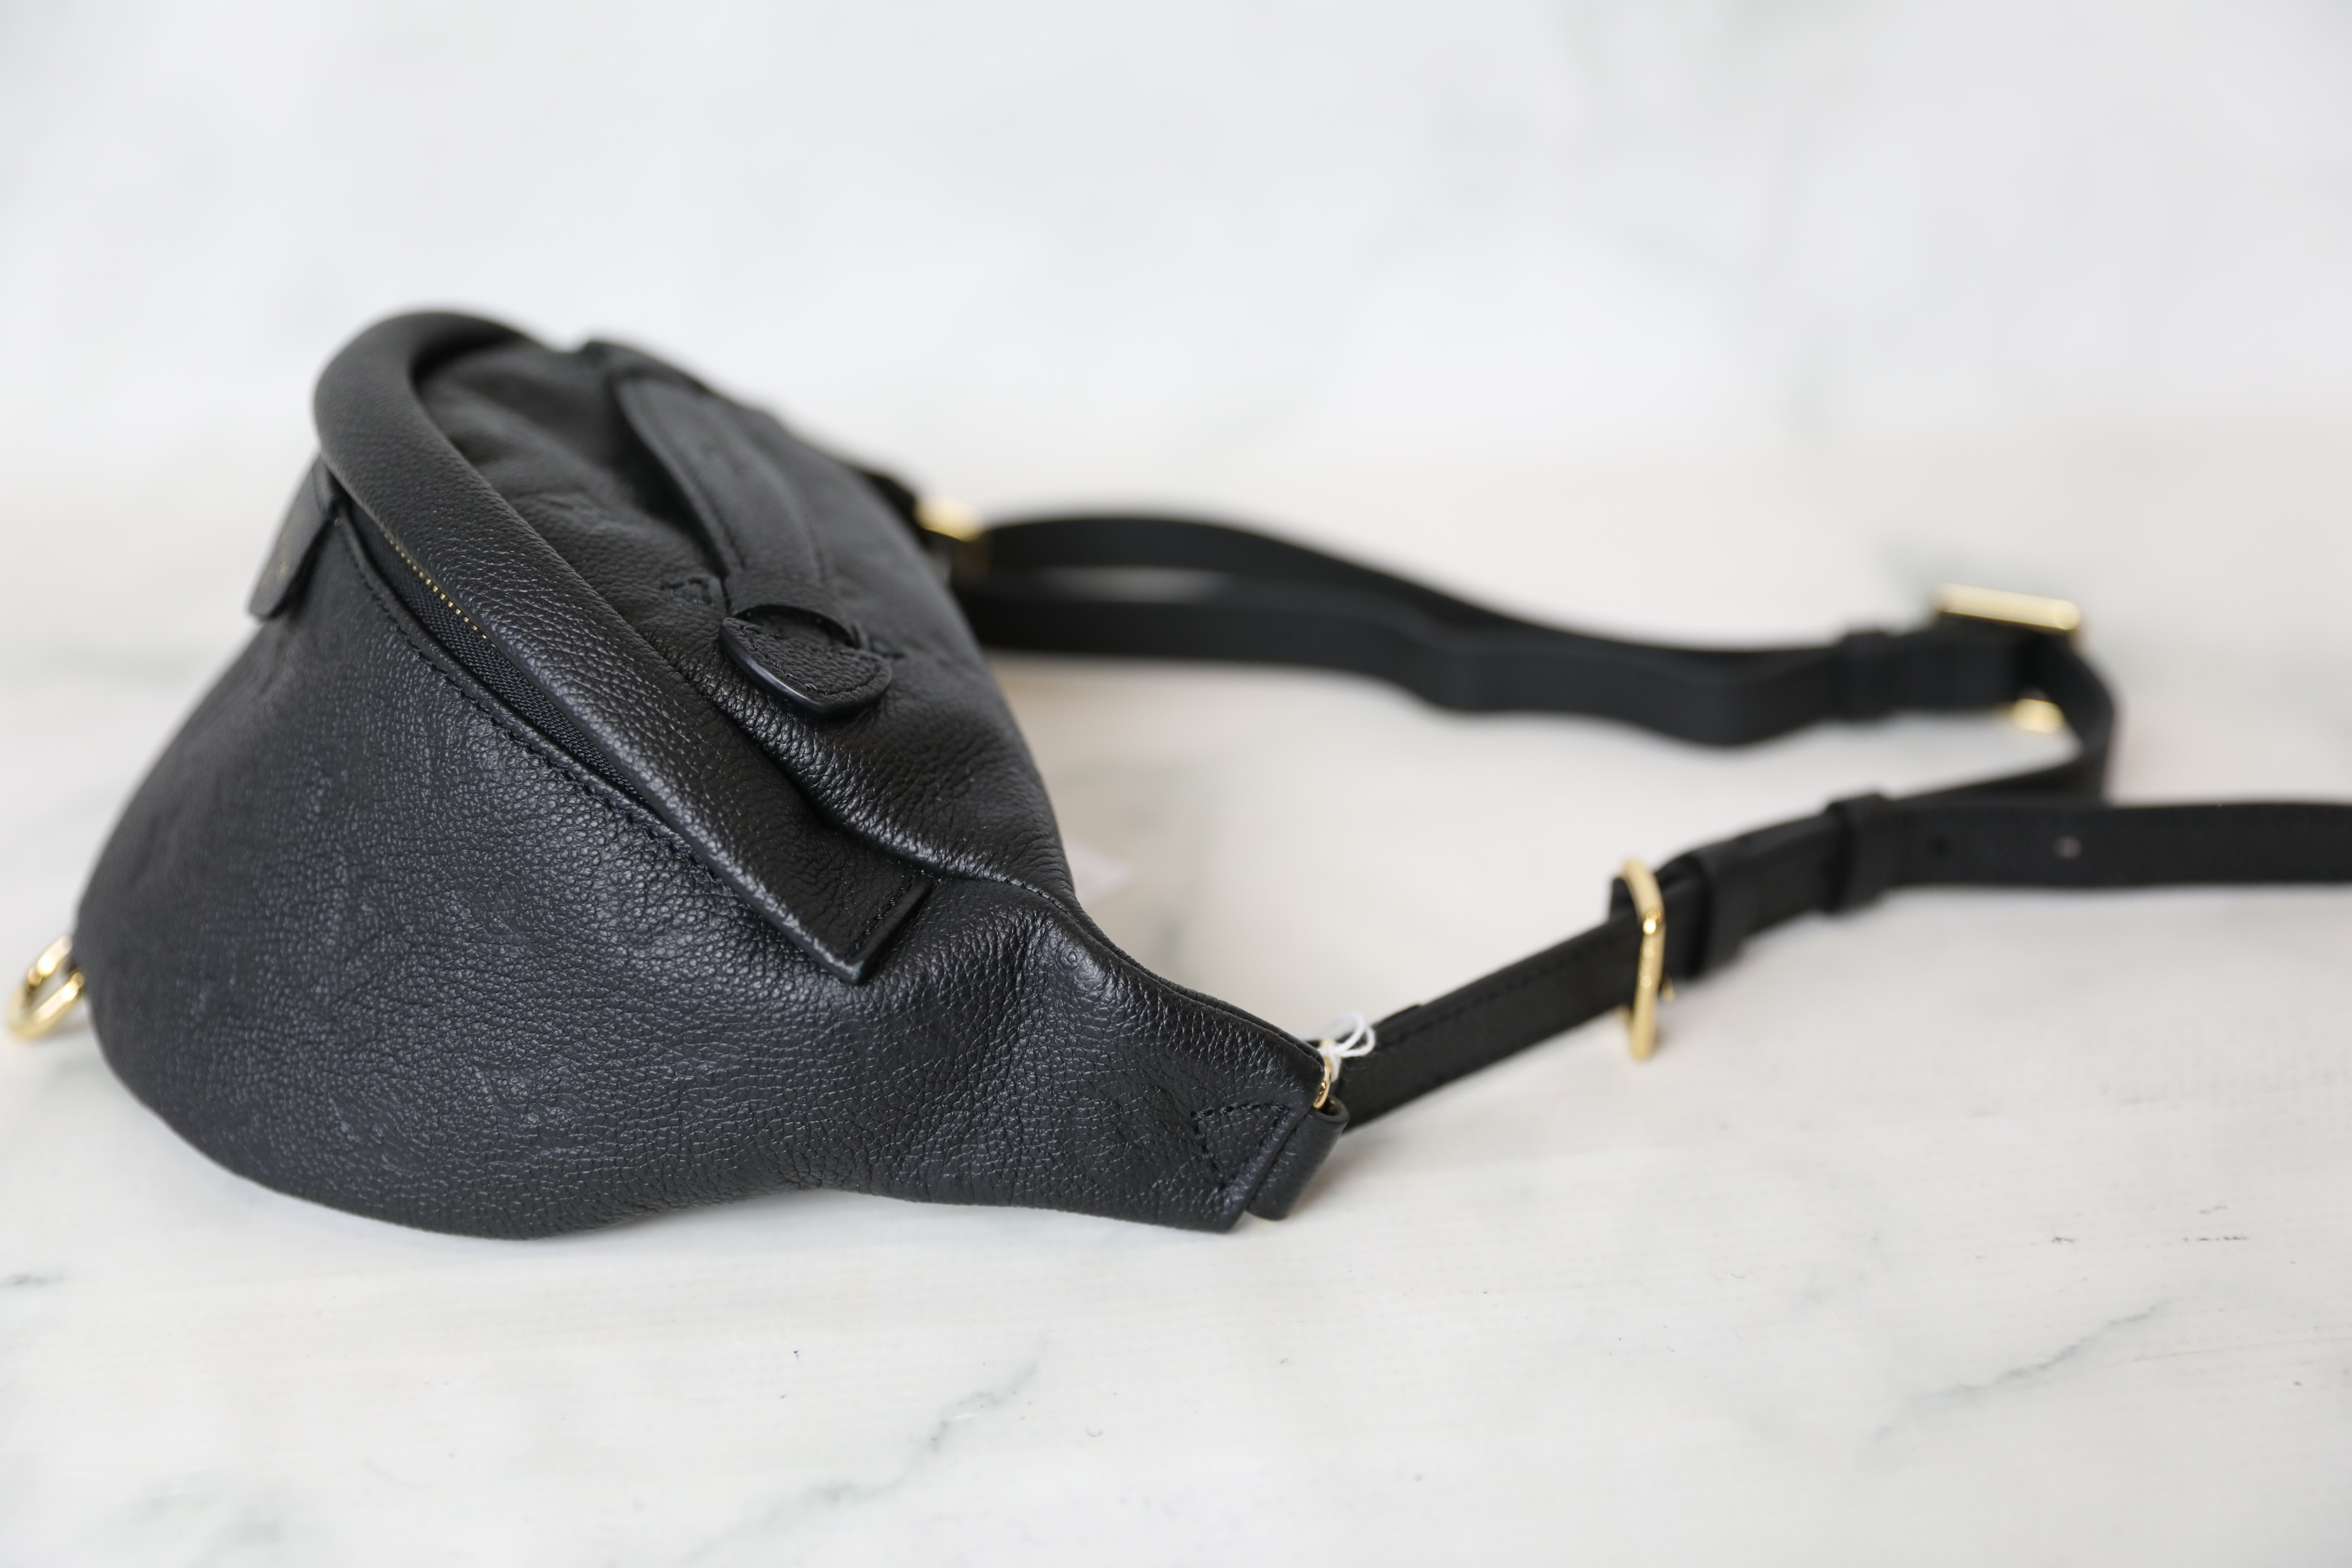 Dark Brown Braided Leather Bum Bag with LV – Emma Lou's Boutique